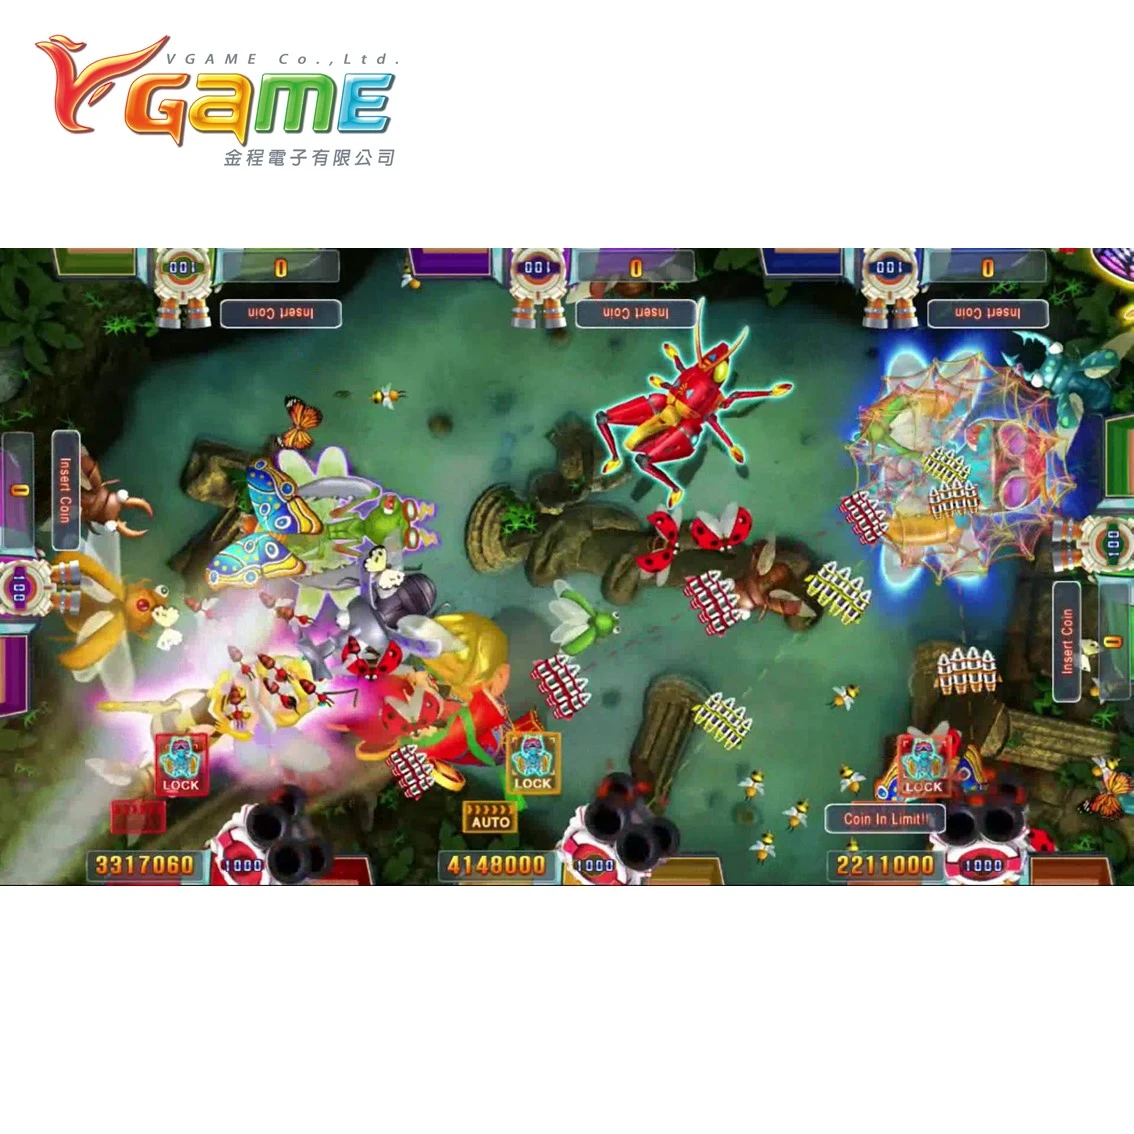 VGAME New Product Indoor Gambling Club Party Games